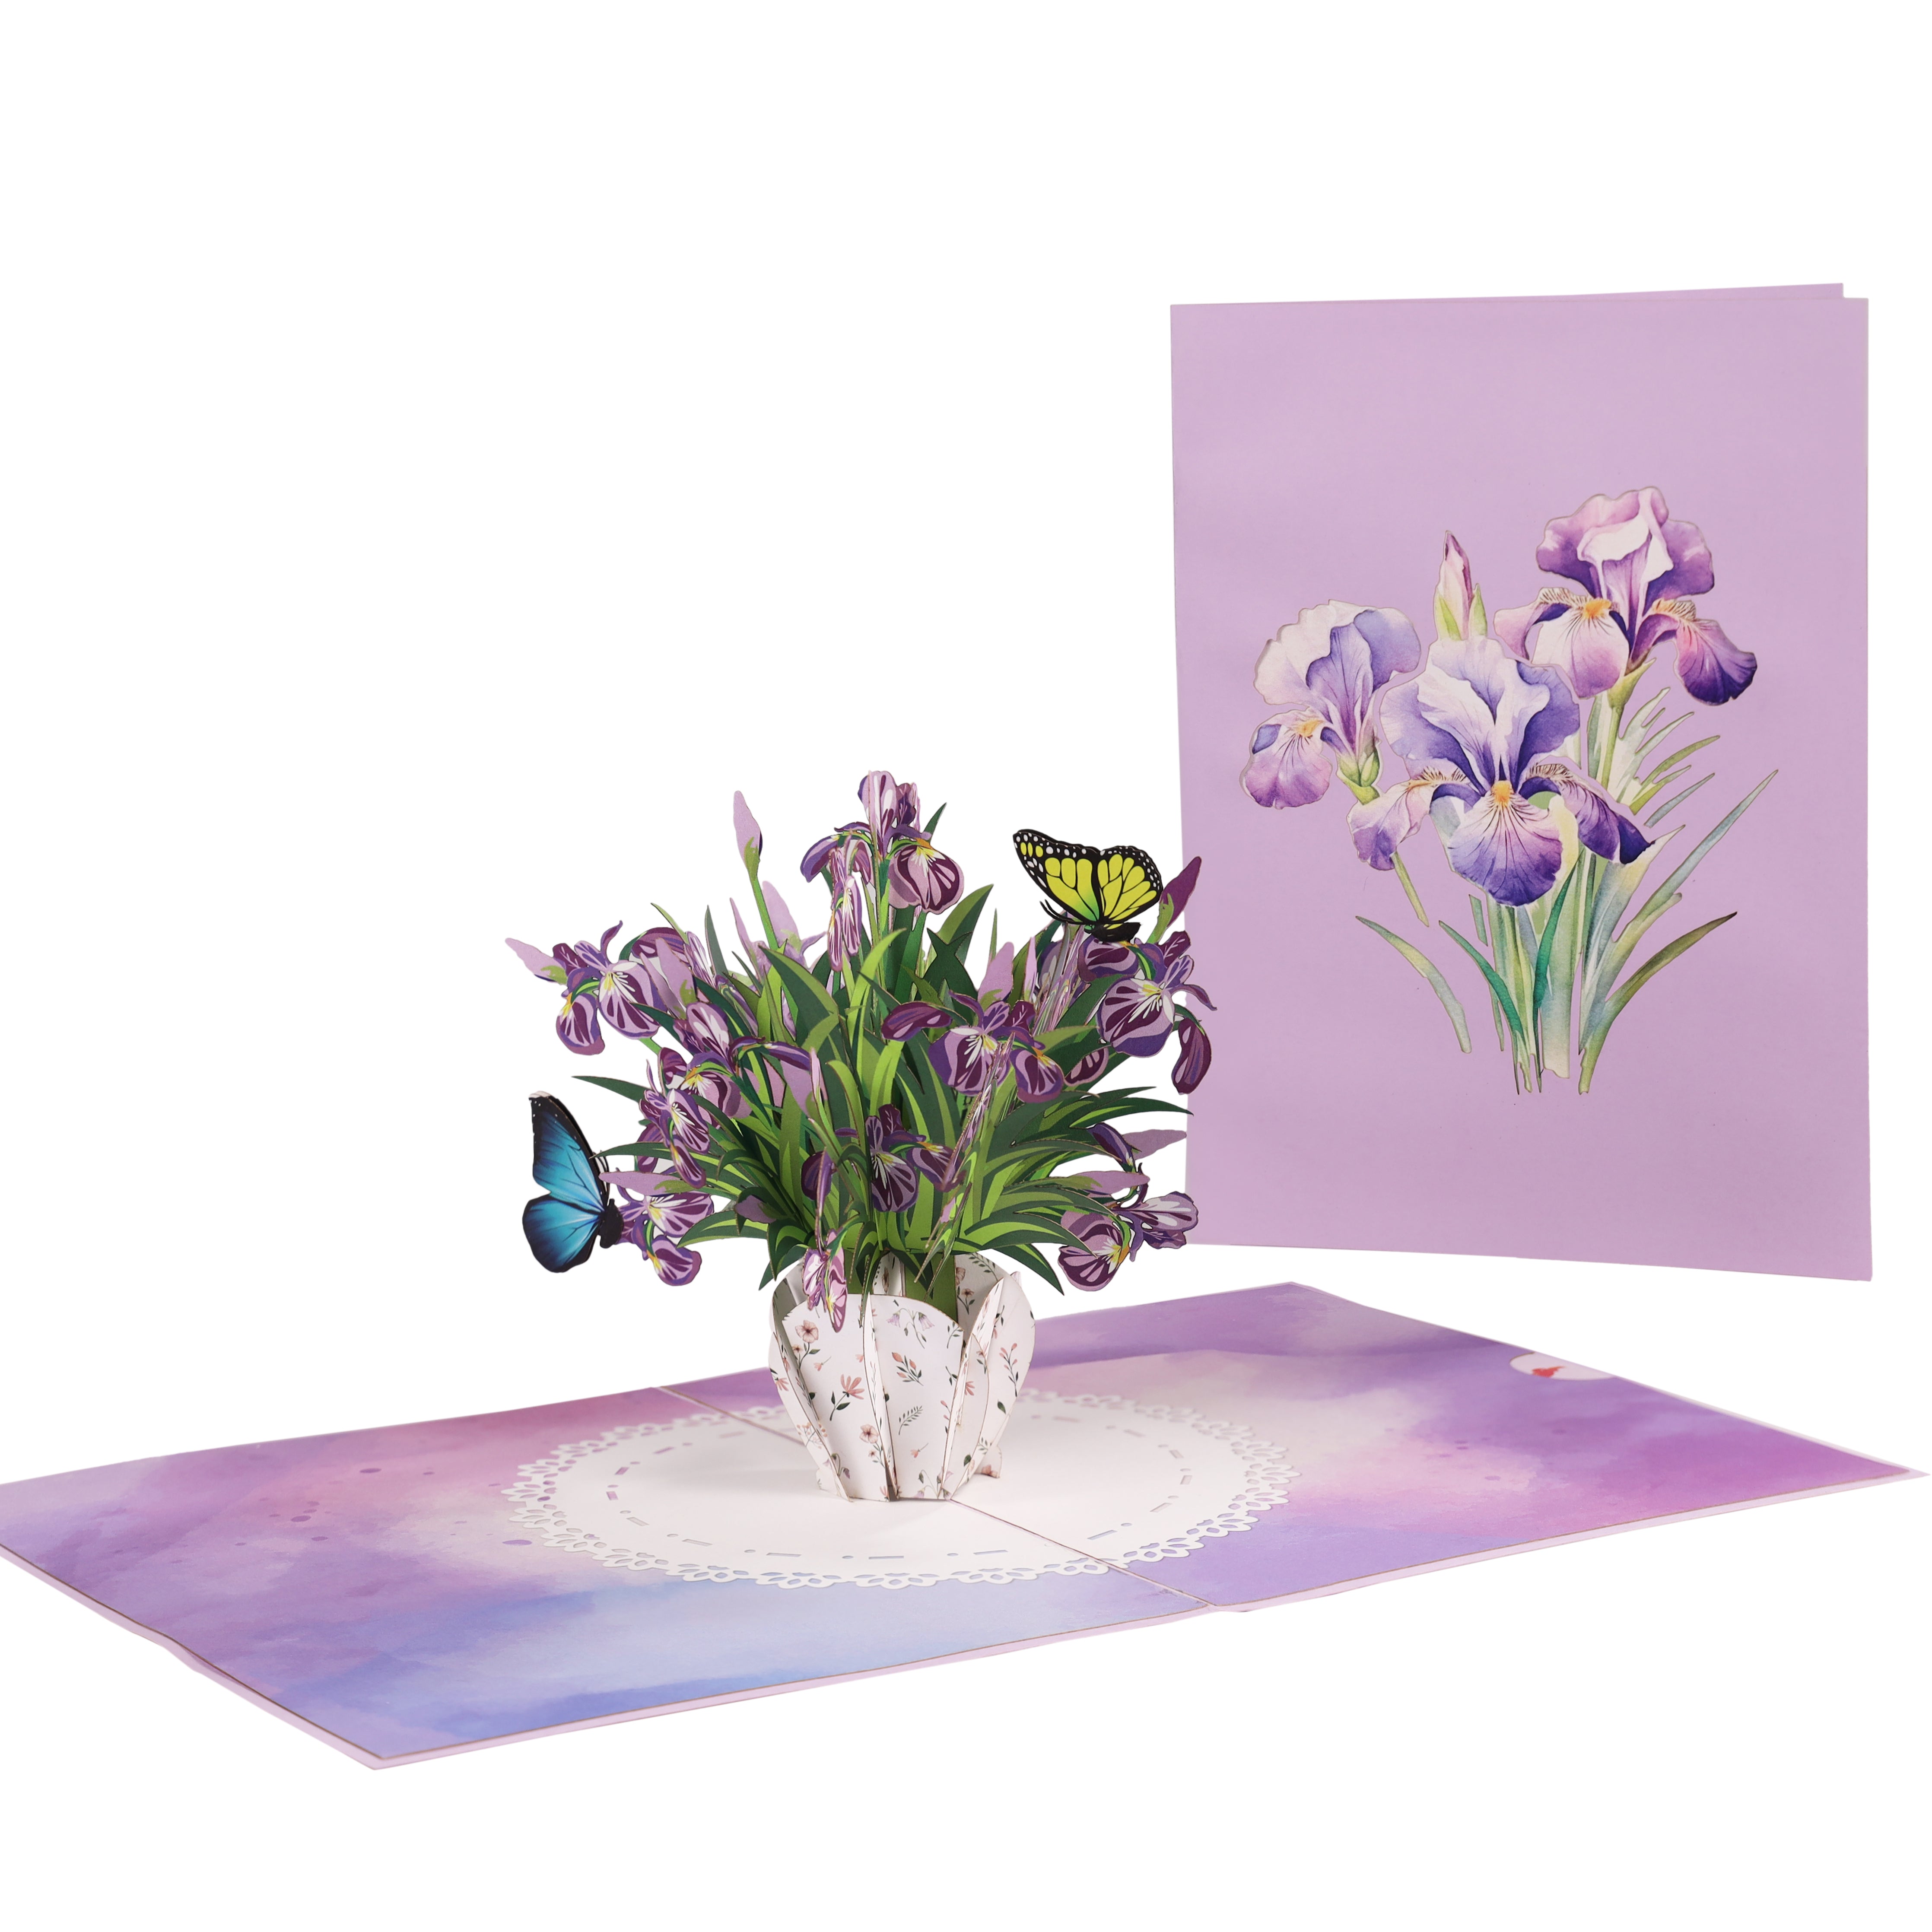 Iris bouquet 3D pop-up card for Birthdays, thank you, and Mother's Day